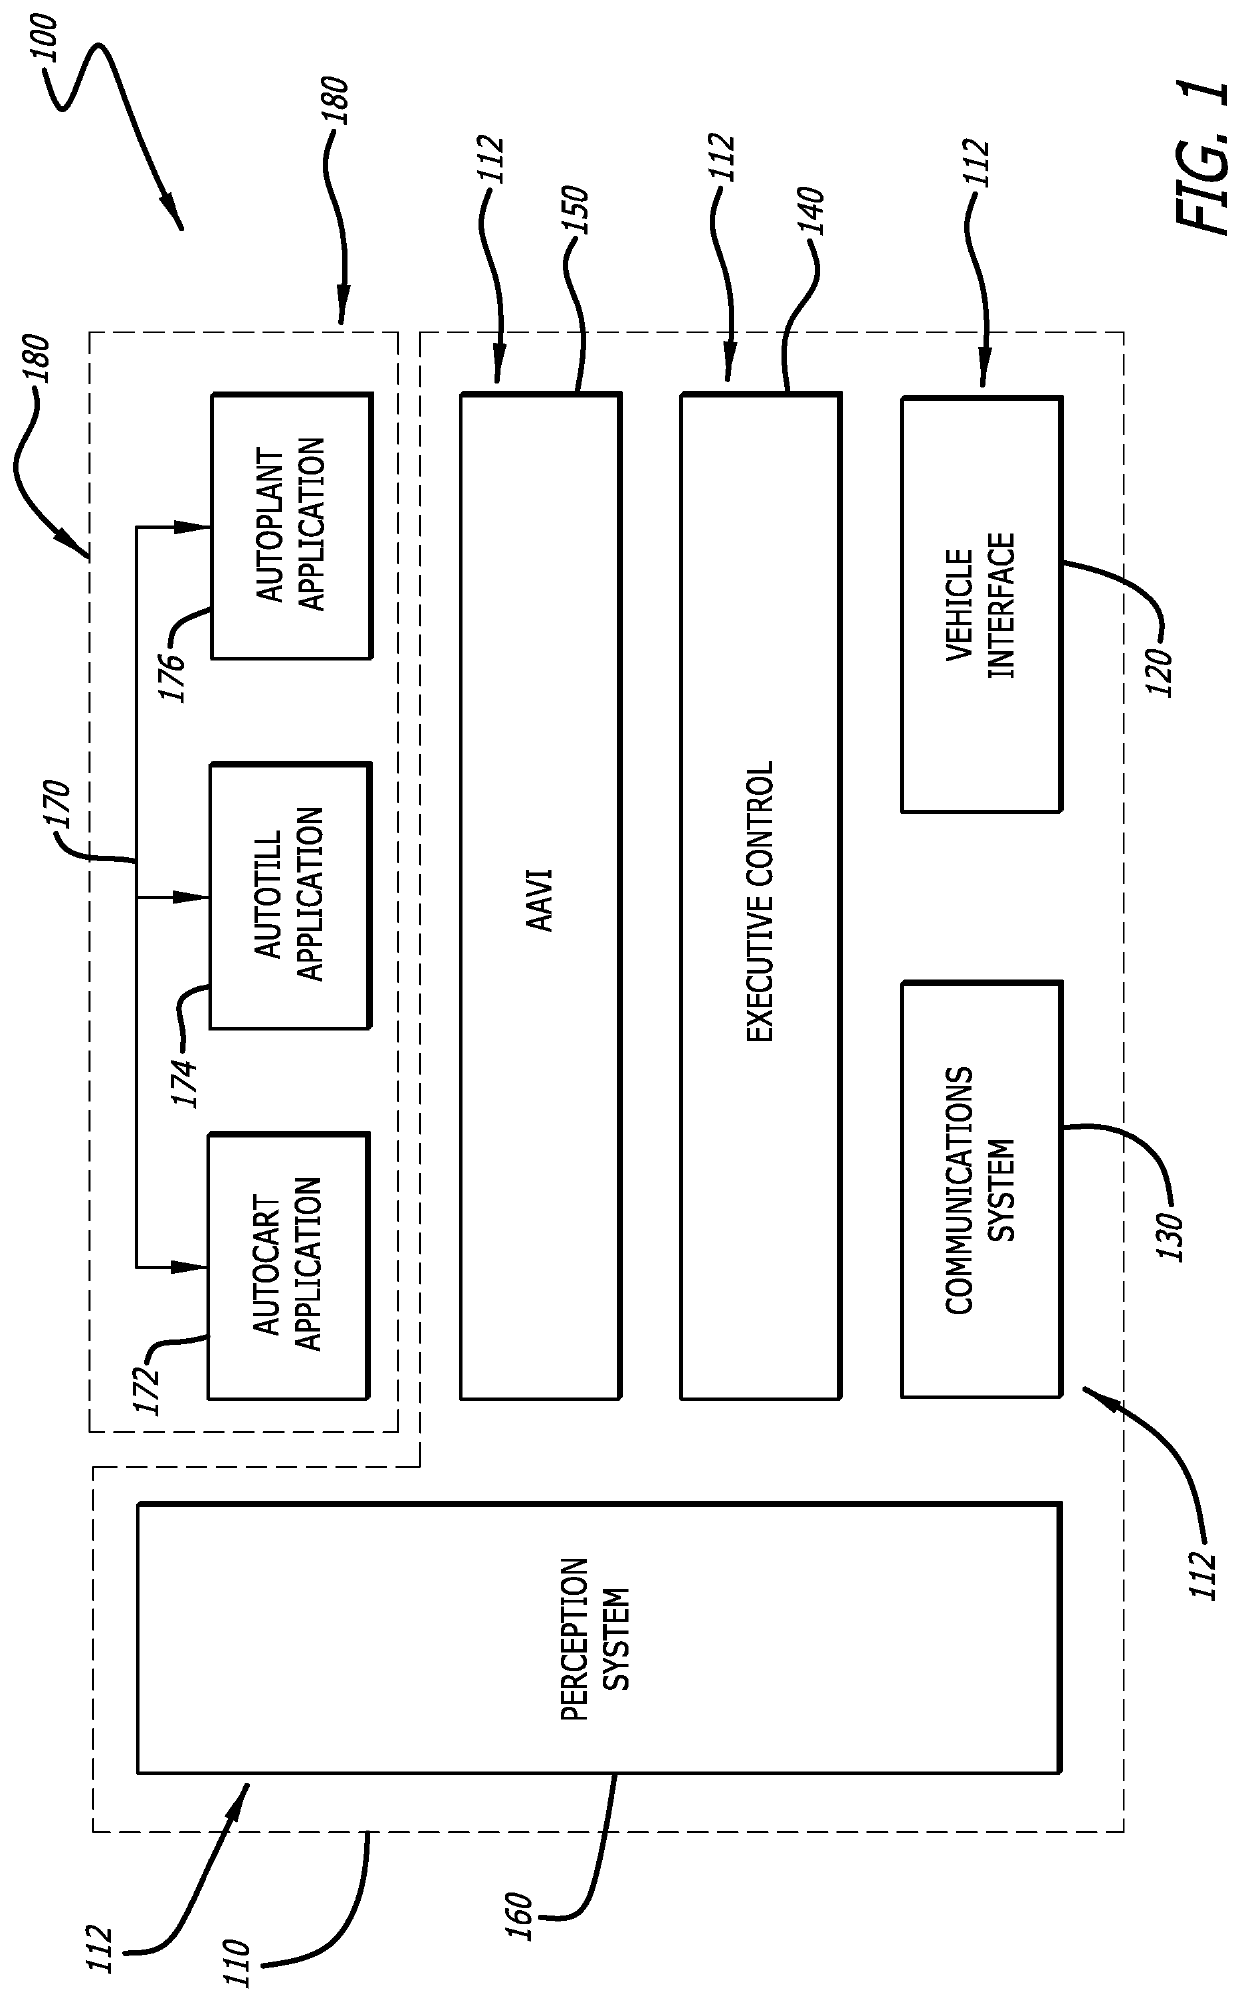 Integrated platform and common software structural architecture for autonomous agricultural vehicle and machinery operation